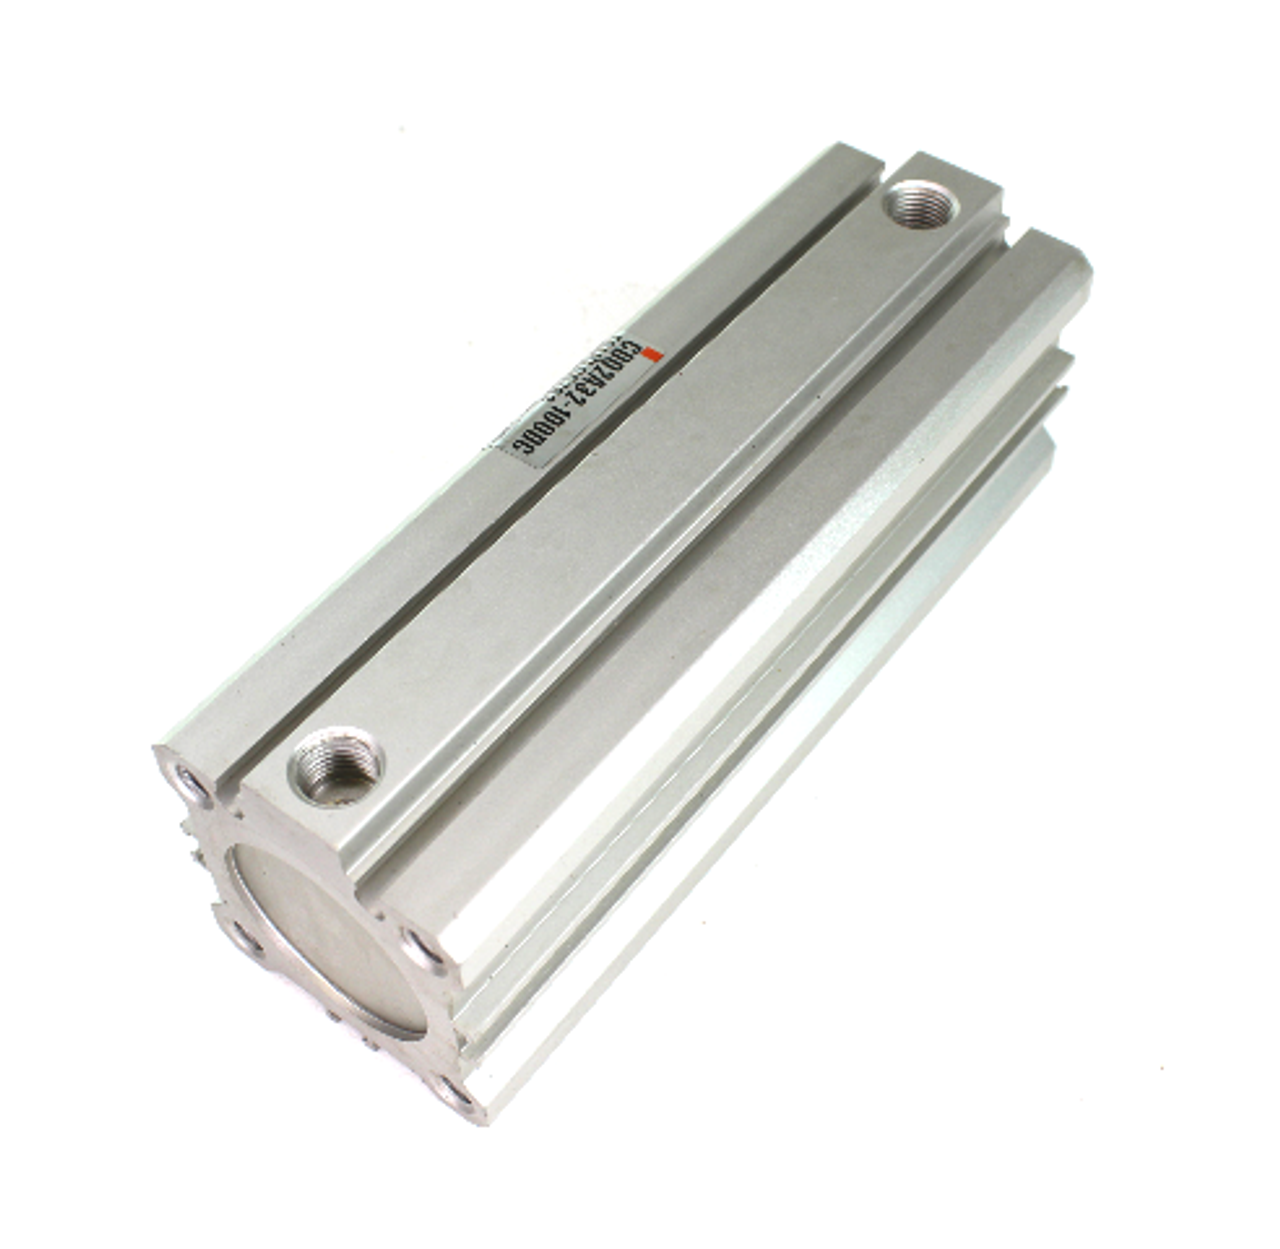 SMC CDQ2A32-100DC Pneumatic Cylinder 32mm Bore 100mm Stroke